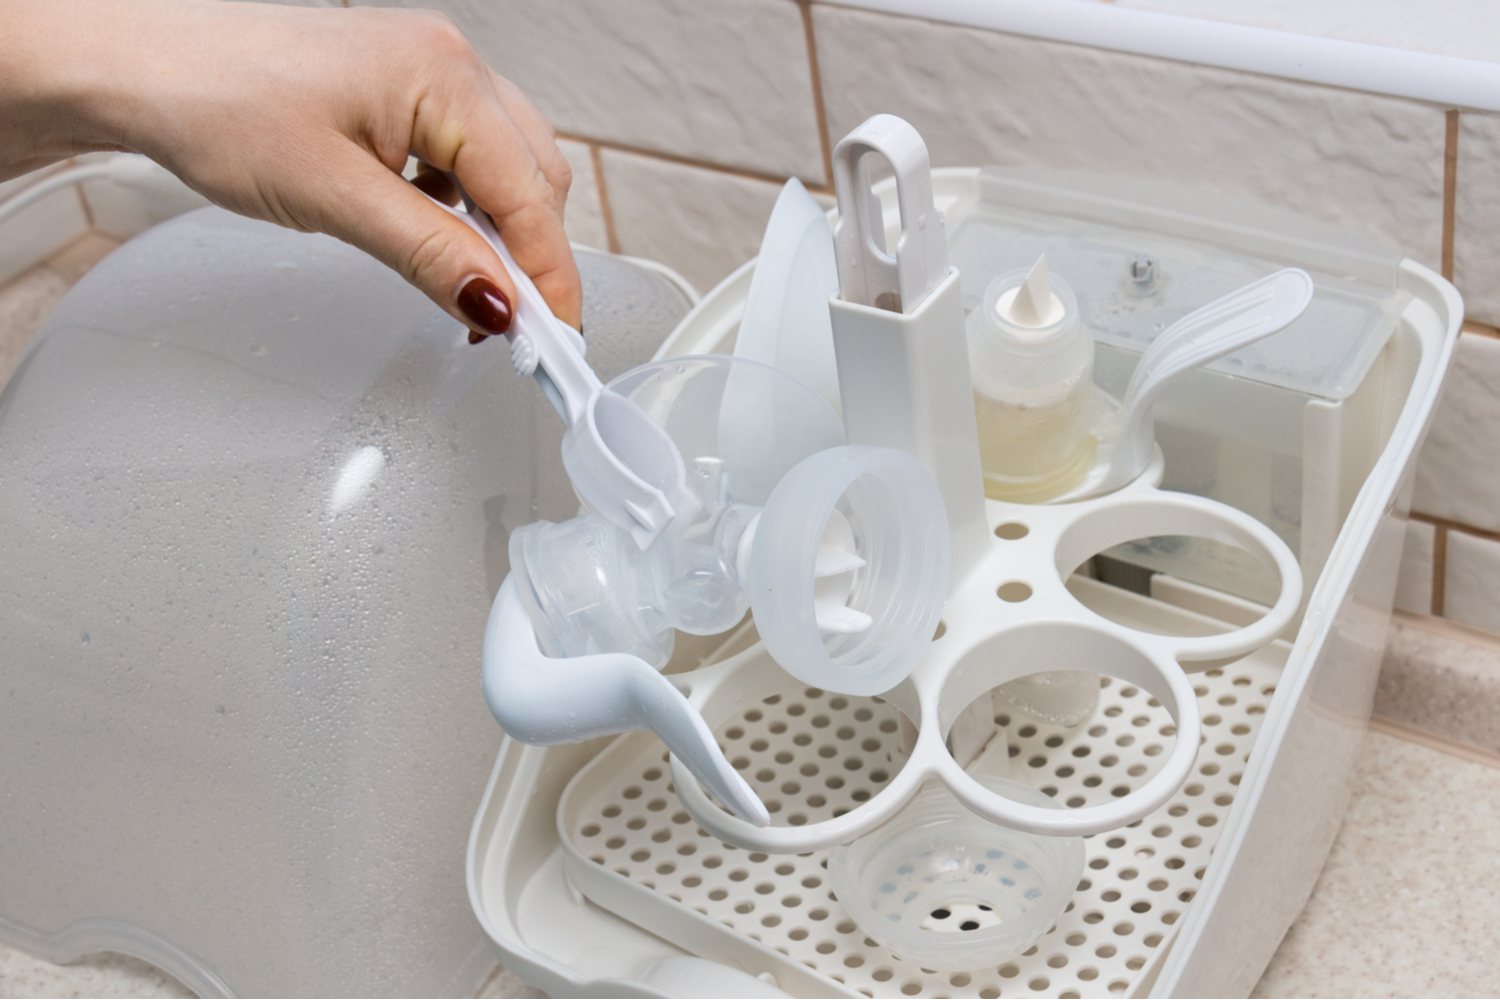 How to Sterilize Breast Pumps